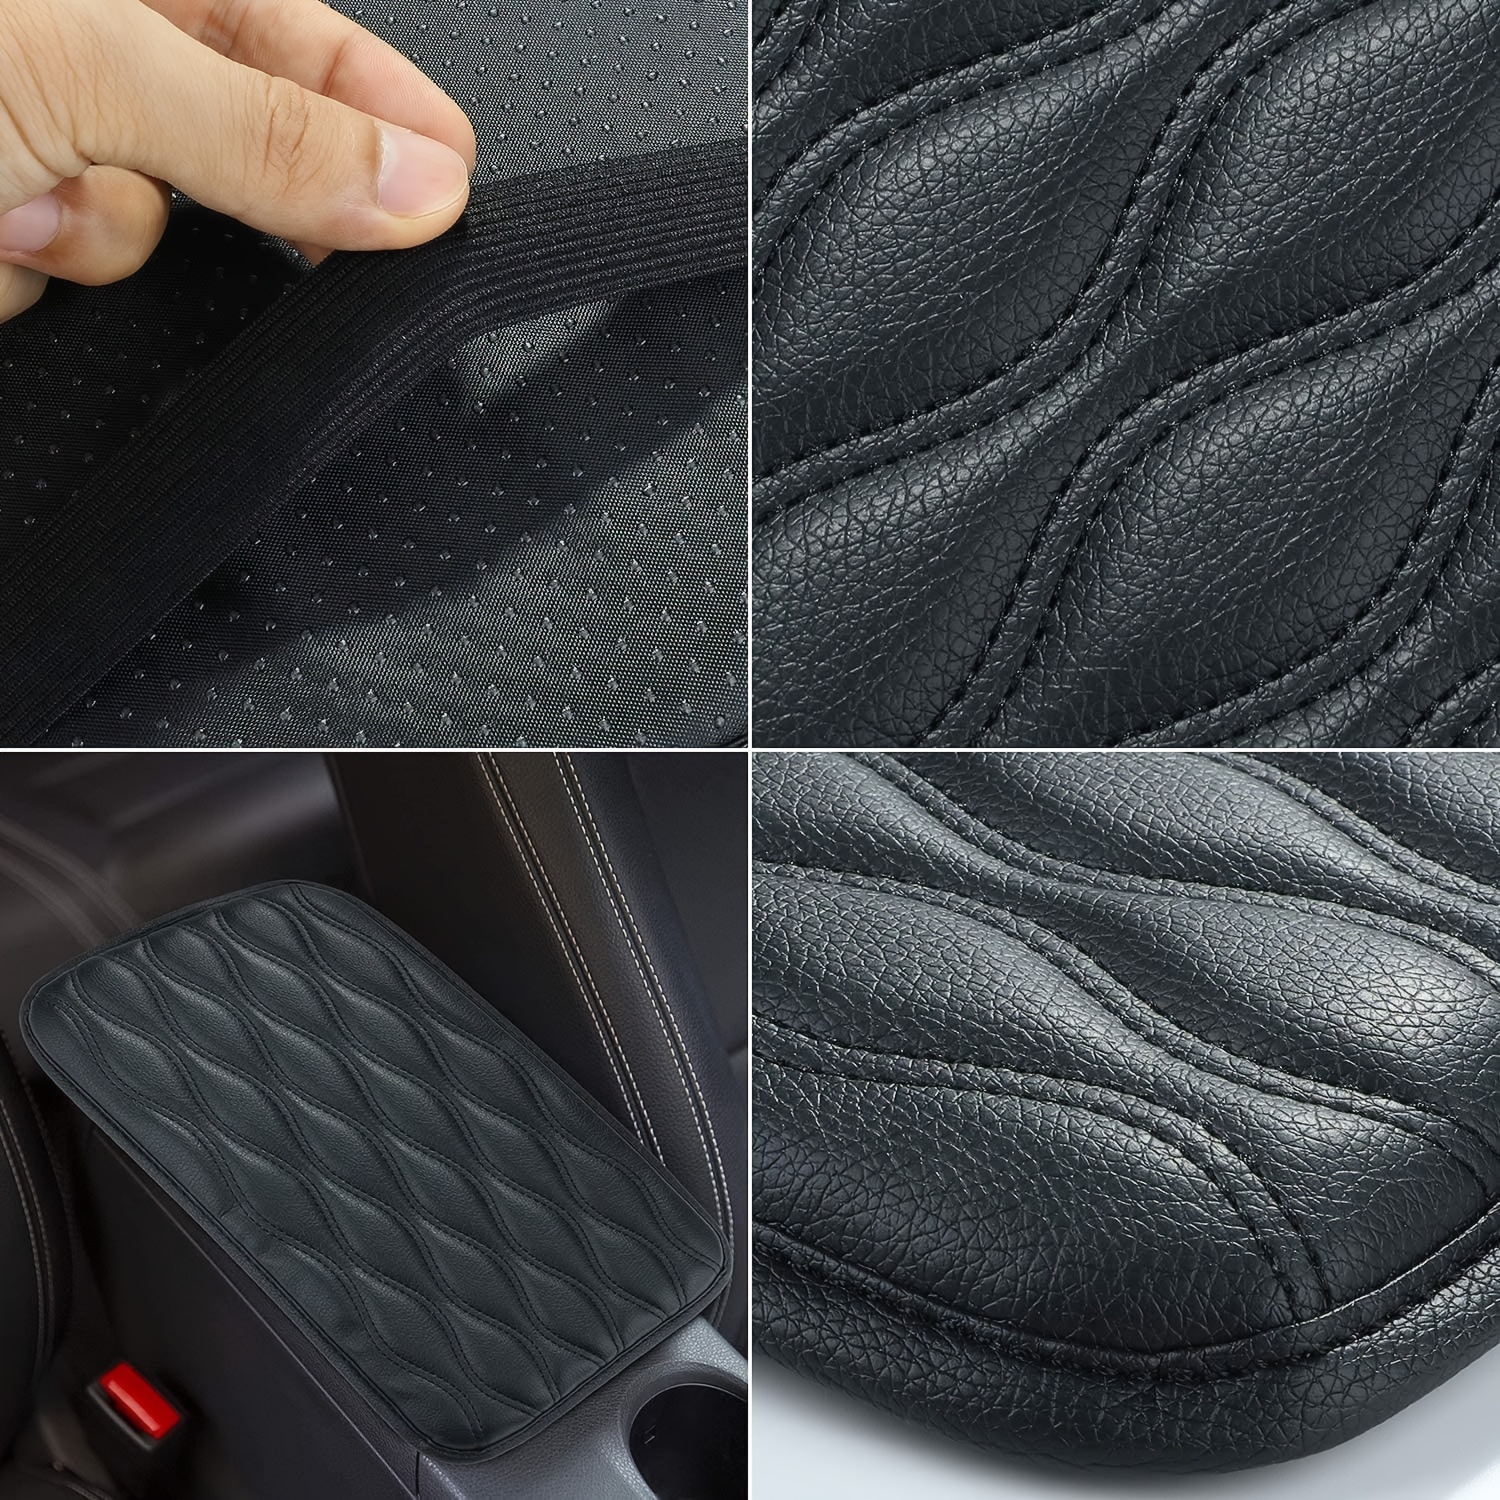 Amiss Car Center Console Pad, Universal Waterproof Car Armrest Seat Box  Cover, Car Interior Accessories, Carbon Fiber PU Leather Auto Armrest Cover